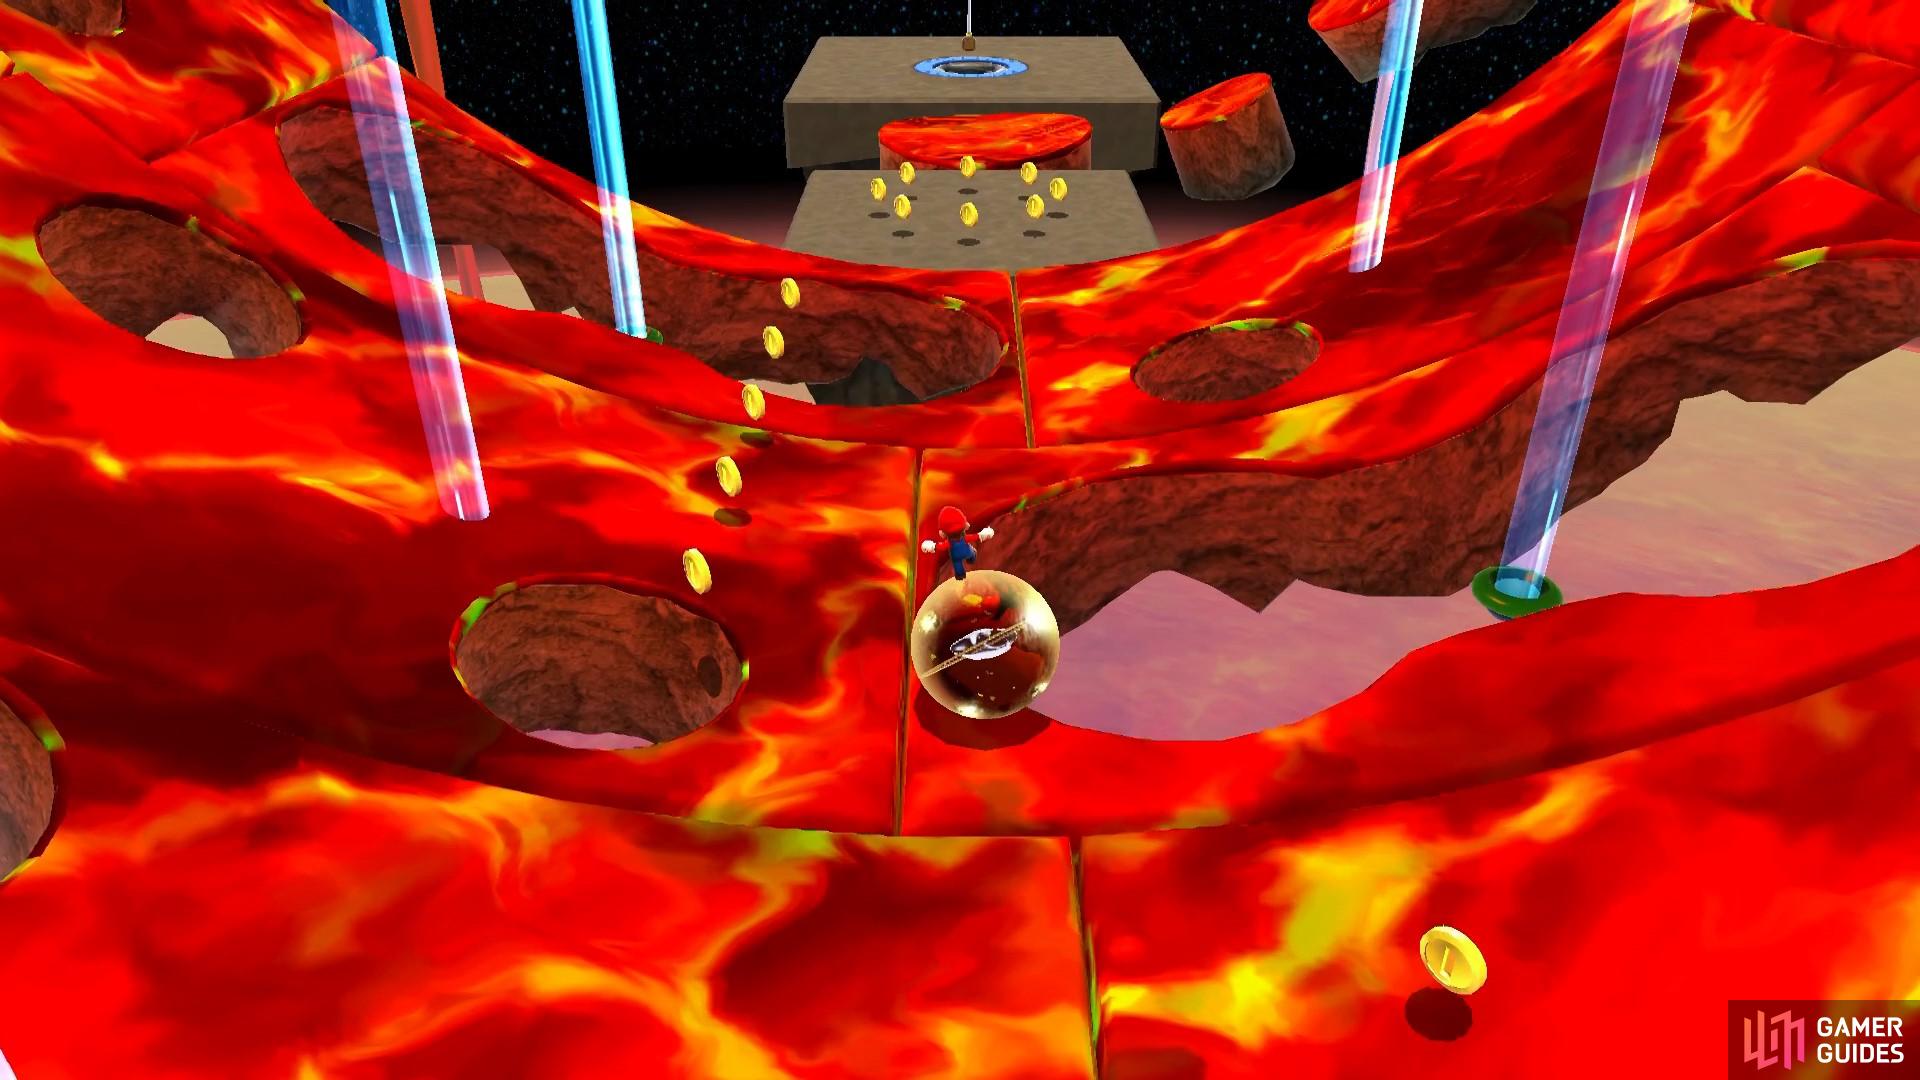 Carefully guide the Star Ball through the holes in the lava cylinder.